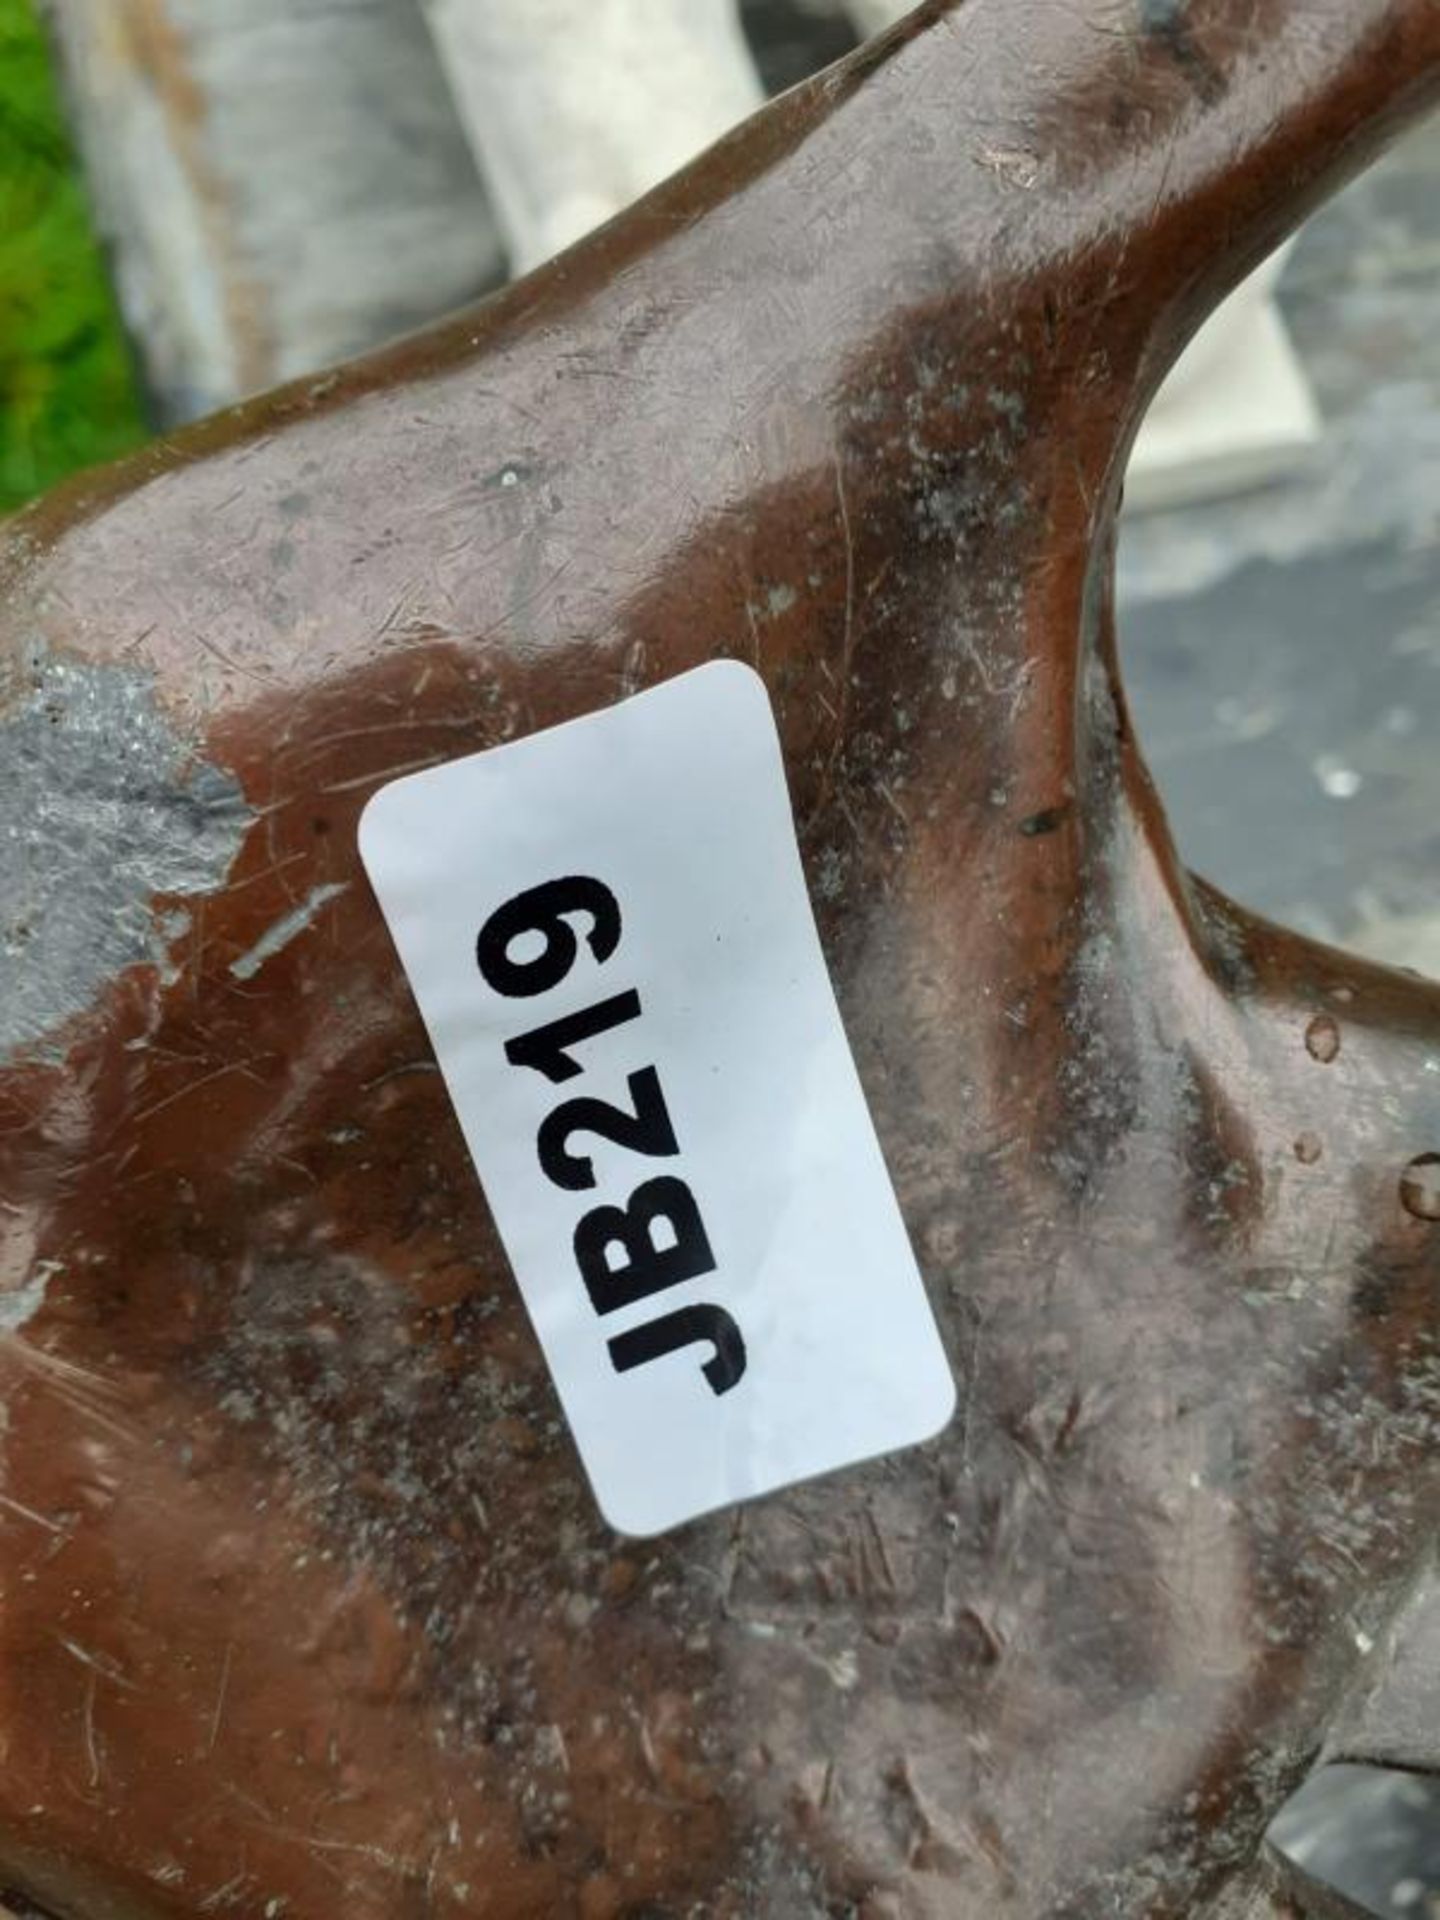 1 x Heavy, Metal Life Like Hand With Strategically Positioned Digits That Give The Sculpture Persona - Image 4 of 5